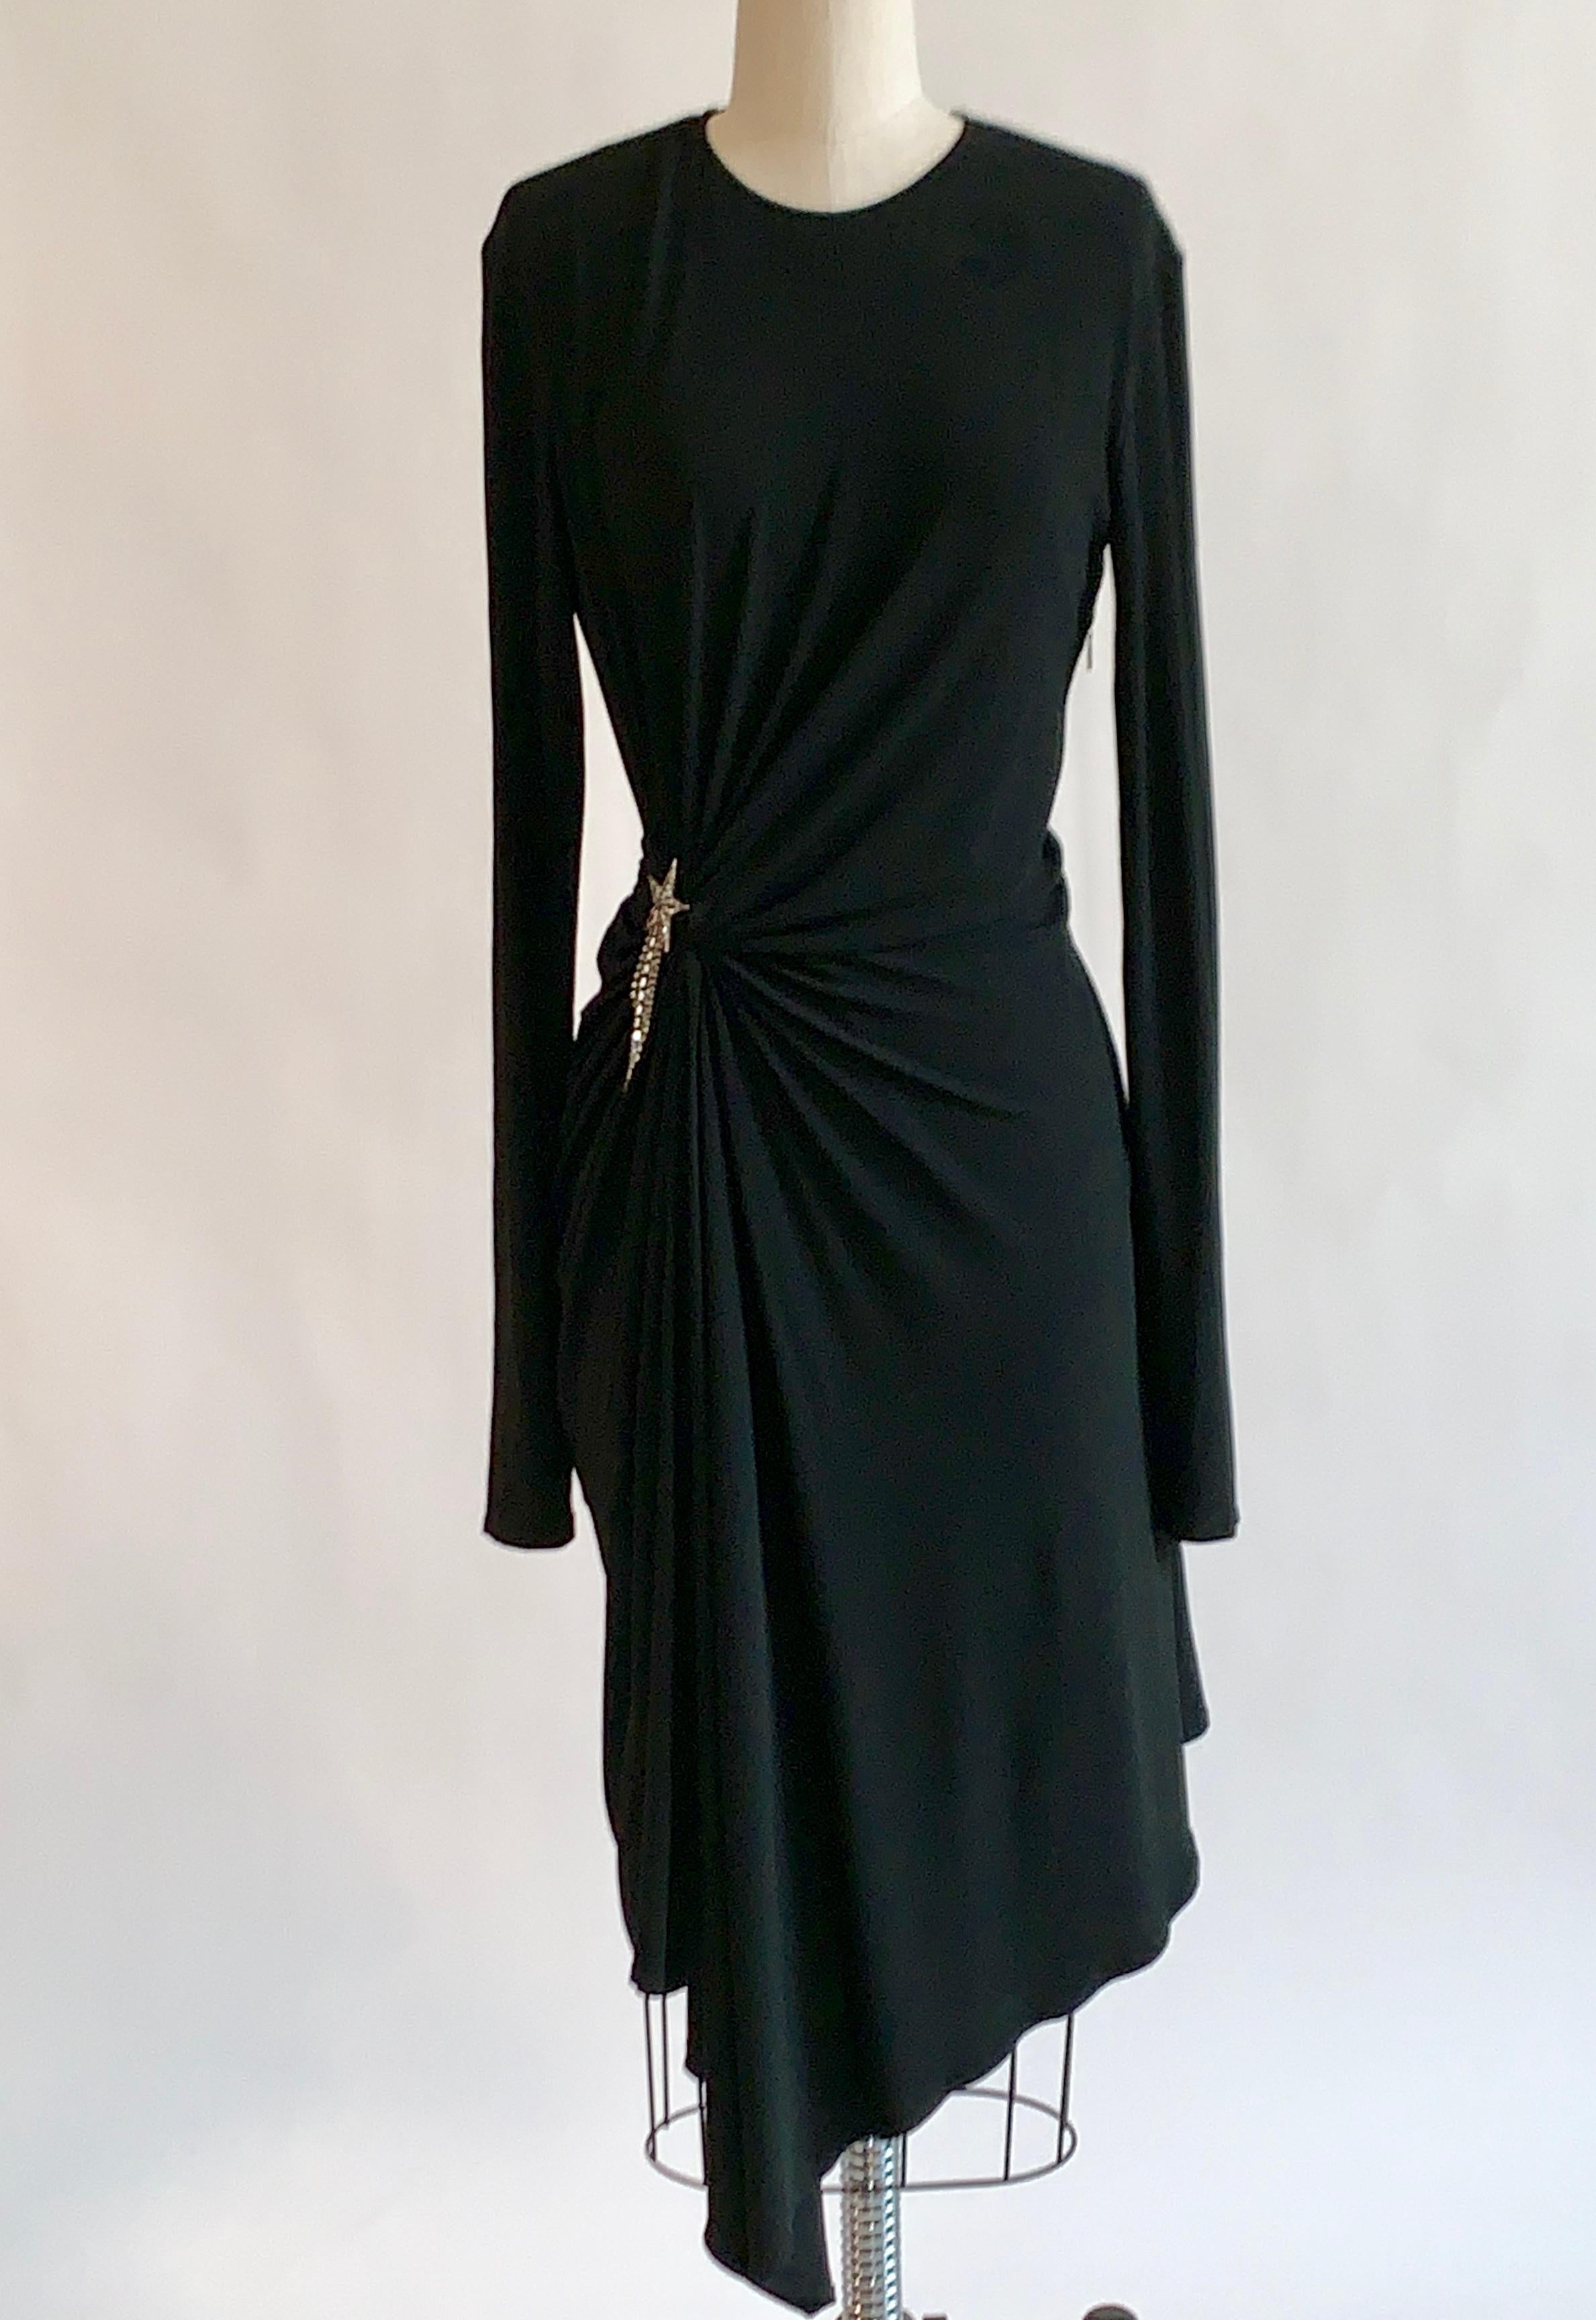 Yves Saint Laurent 2017 black dress with silver tone star embellishment and gathering at side. Longer sleeve length so they can look pushed up, even when worn to wrist.  Round collar and long sleeves. Keyhole with button closure at back neckline,